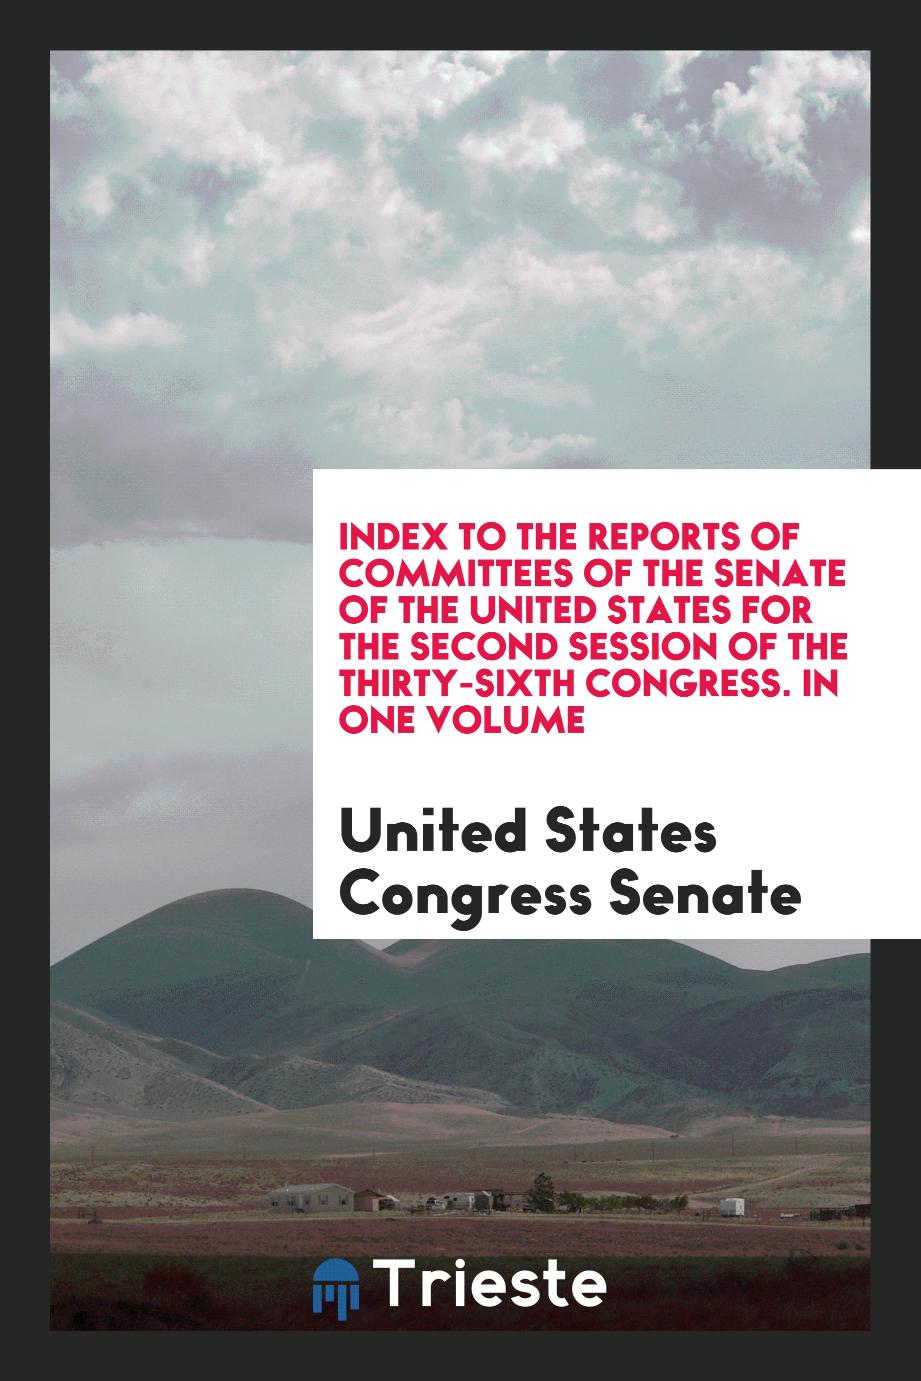 Index to the Reports of Committees of the Senate of the United States for the Second Session of the Thirty-Sixth Congress. In One Volume